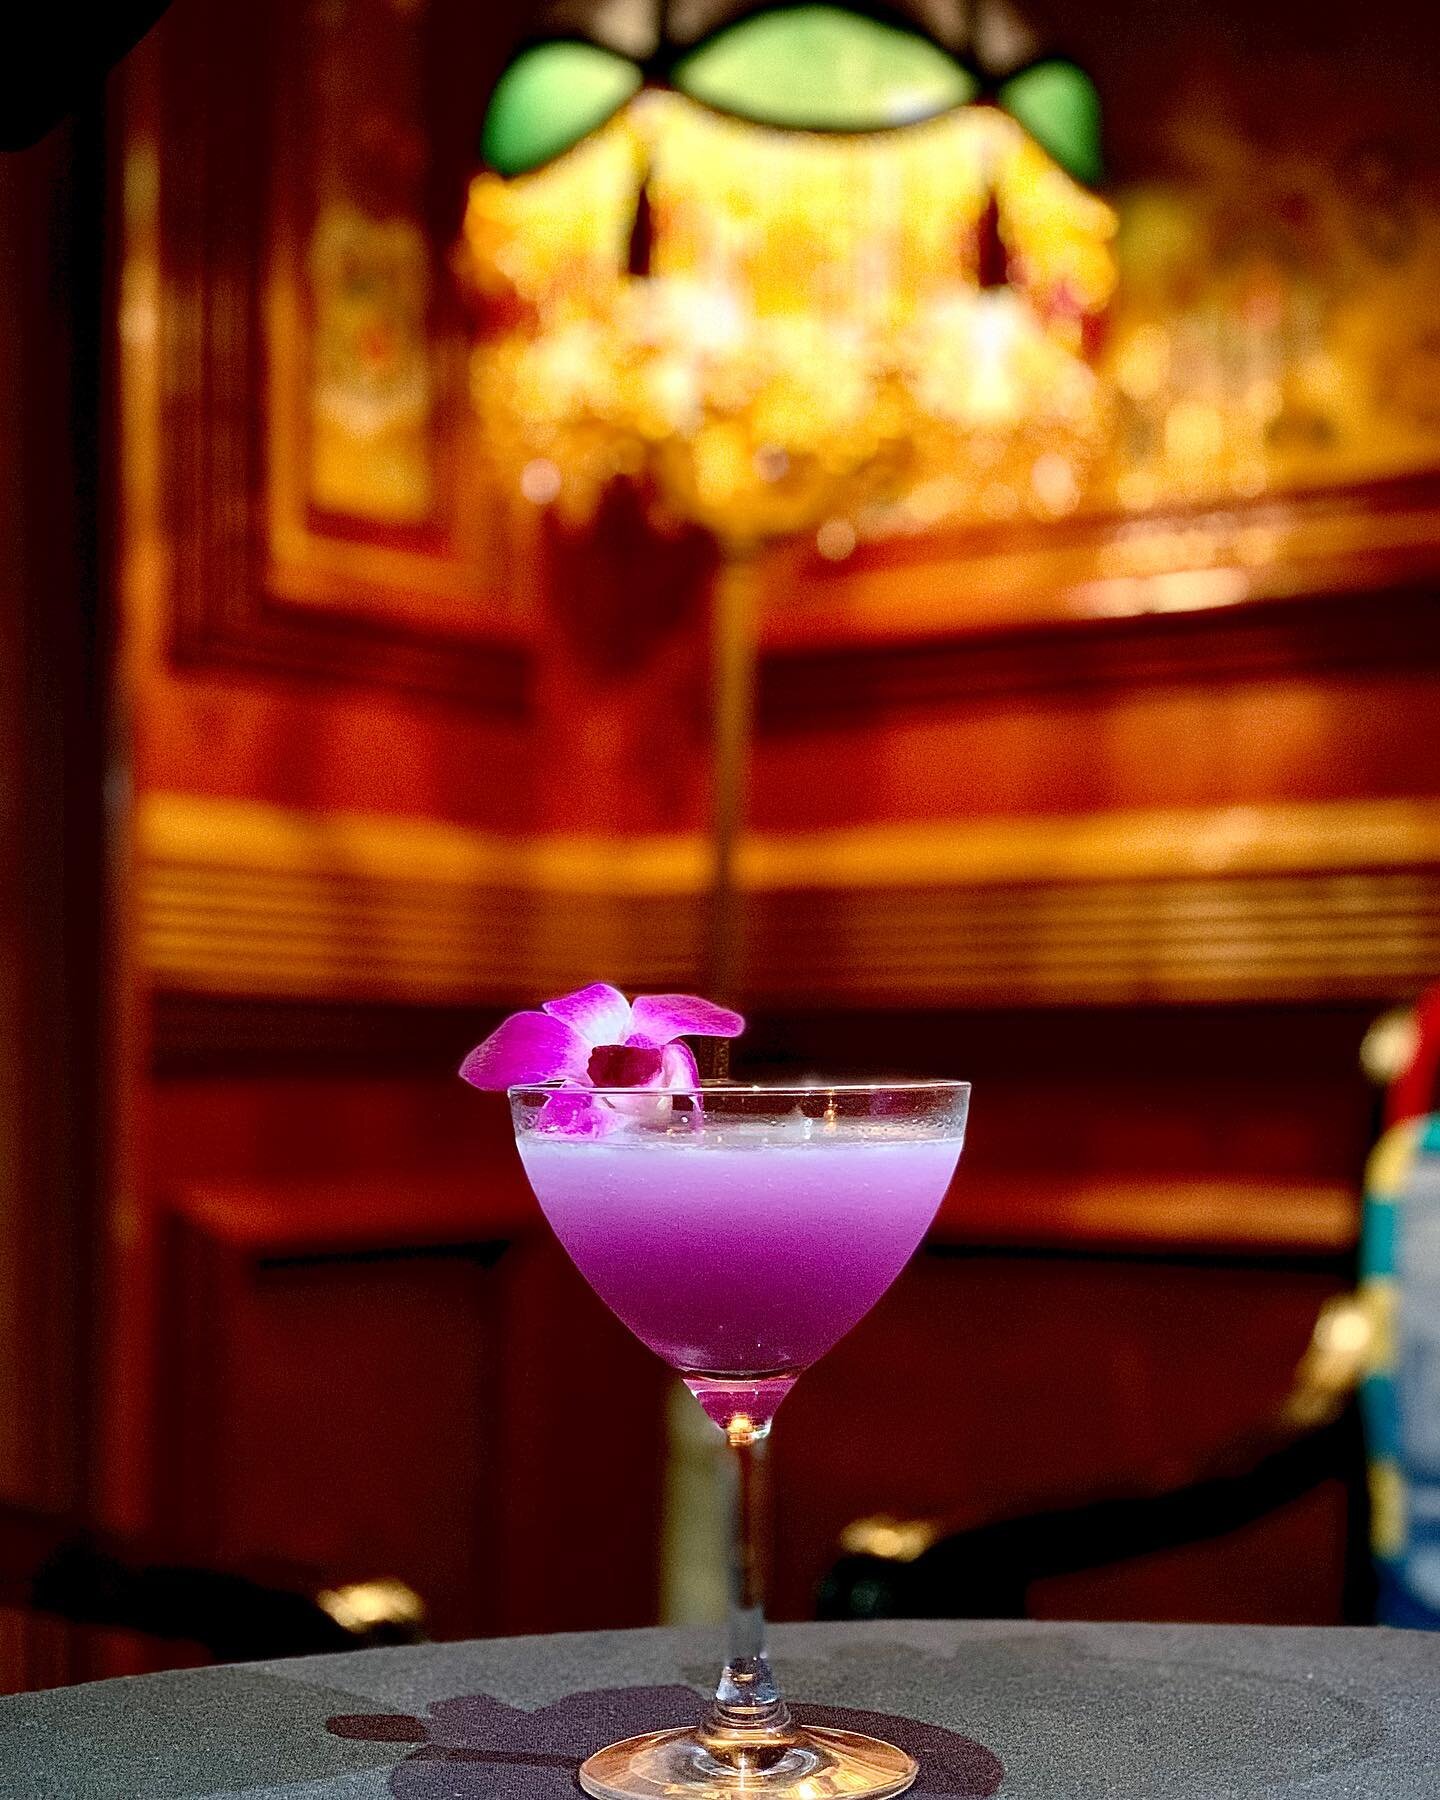 &ldquo;Chaos Theory&rdquo; cocktail of the day - @monkey47 gin infused with butterfly pea flowers, grapes, and lavender.